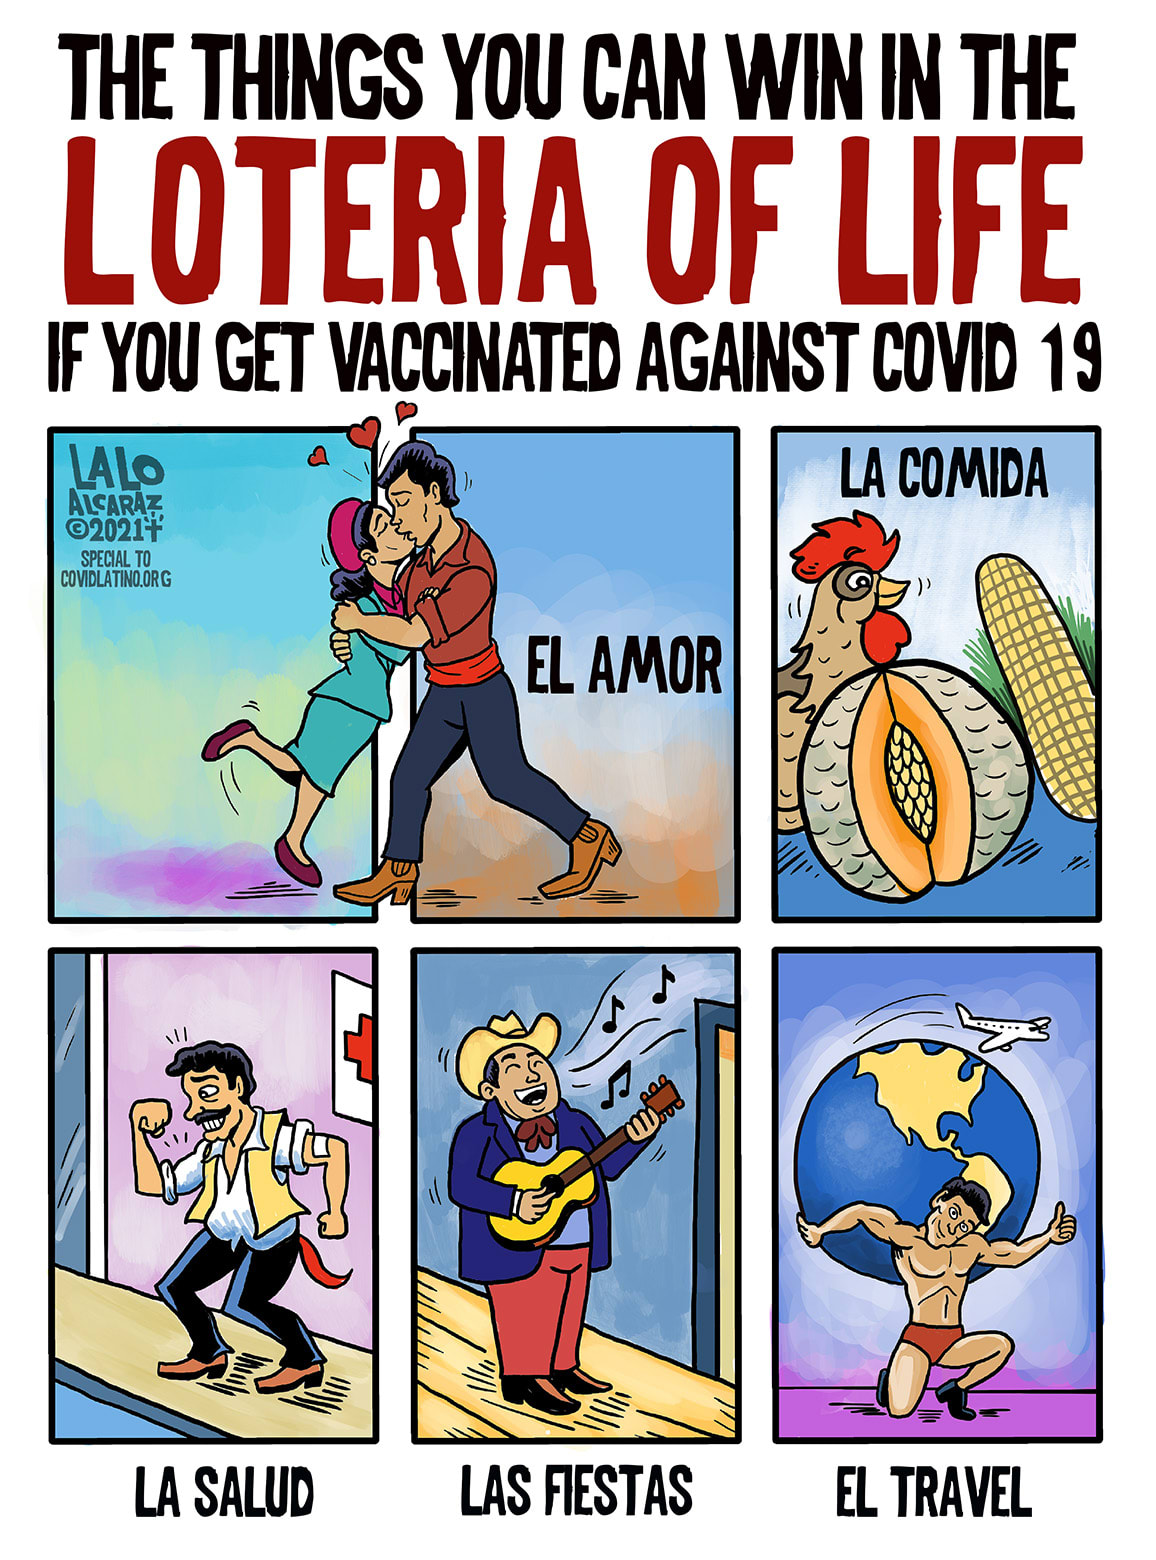 A Latino cartoonist is using his art to encourage vaccinations